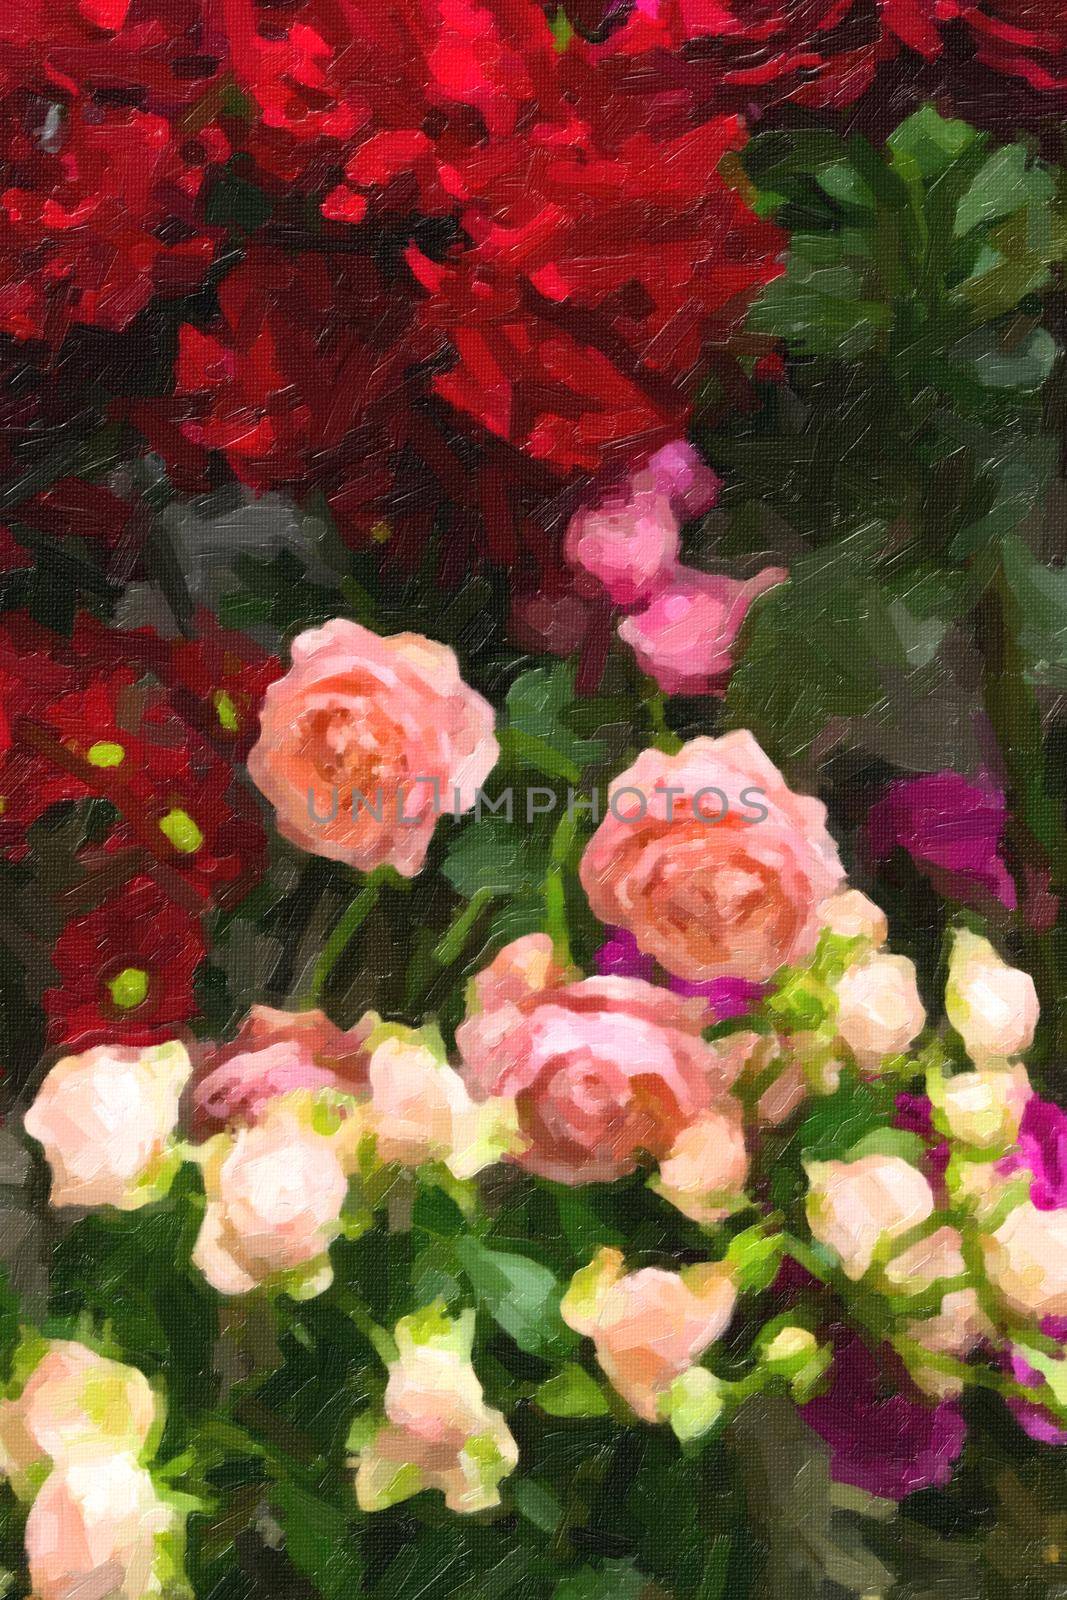 roses of red and pink and yellow shades, stylized as oil paint by TRMK